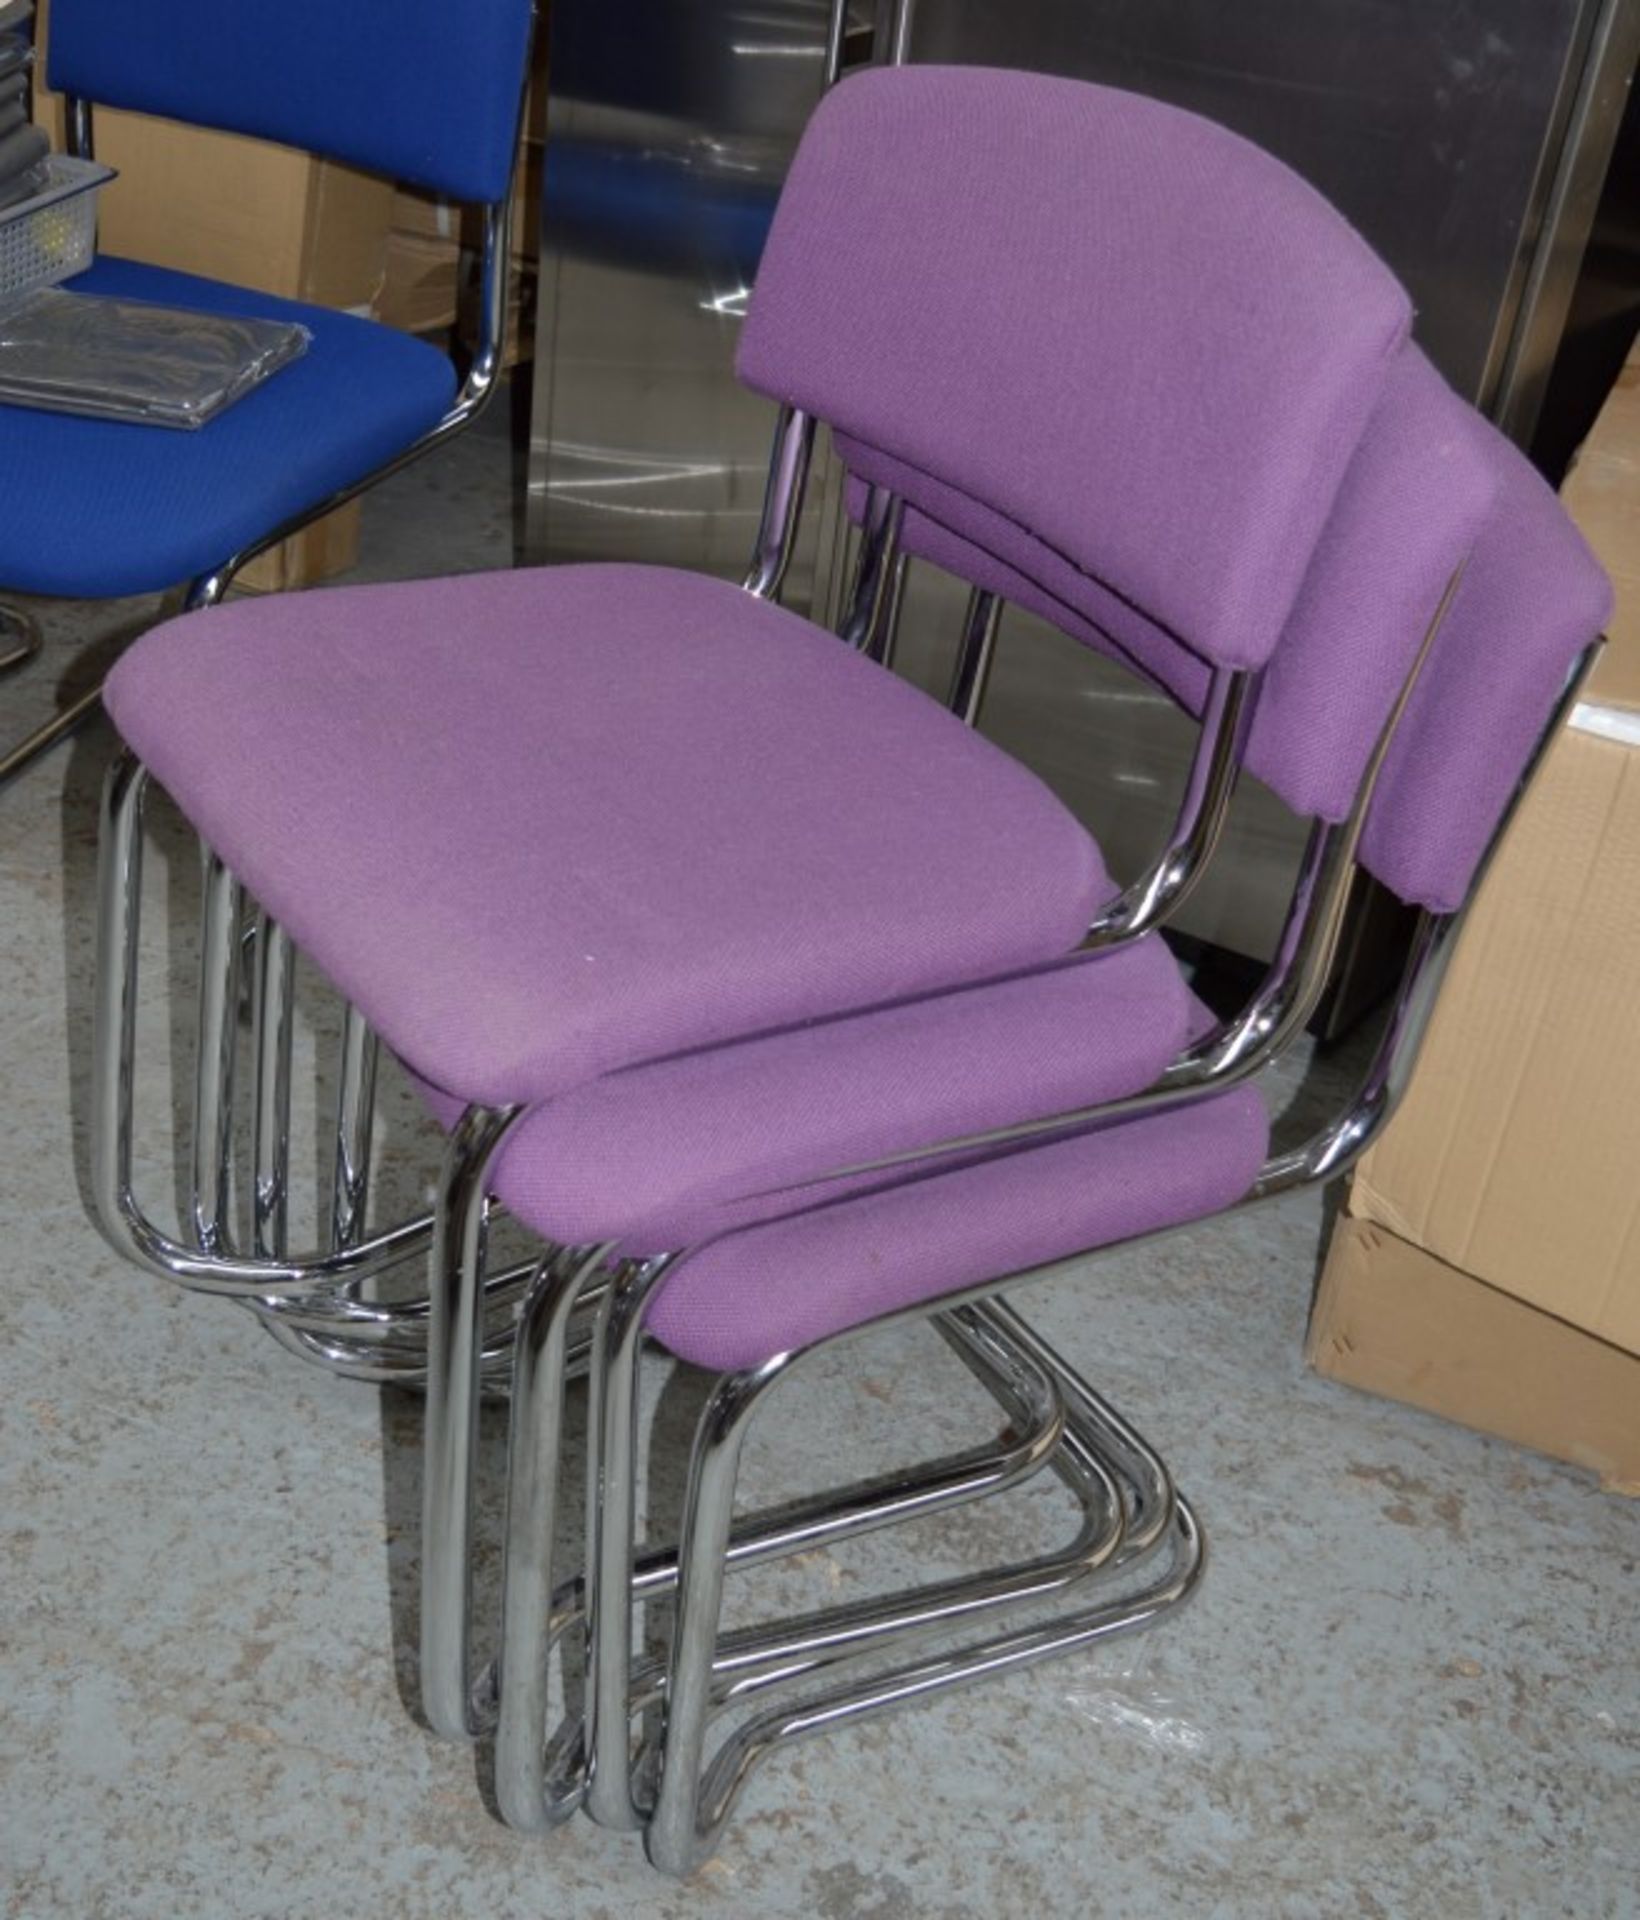 4 x Office Stacking Chairs - Purple Fabric With Chrome Base - CL106 - Good Condition - Location: